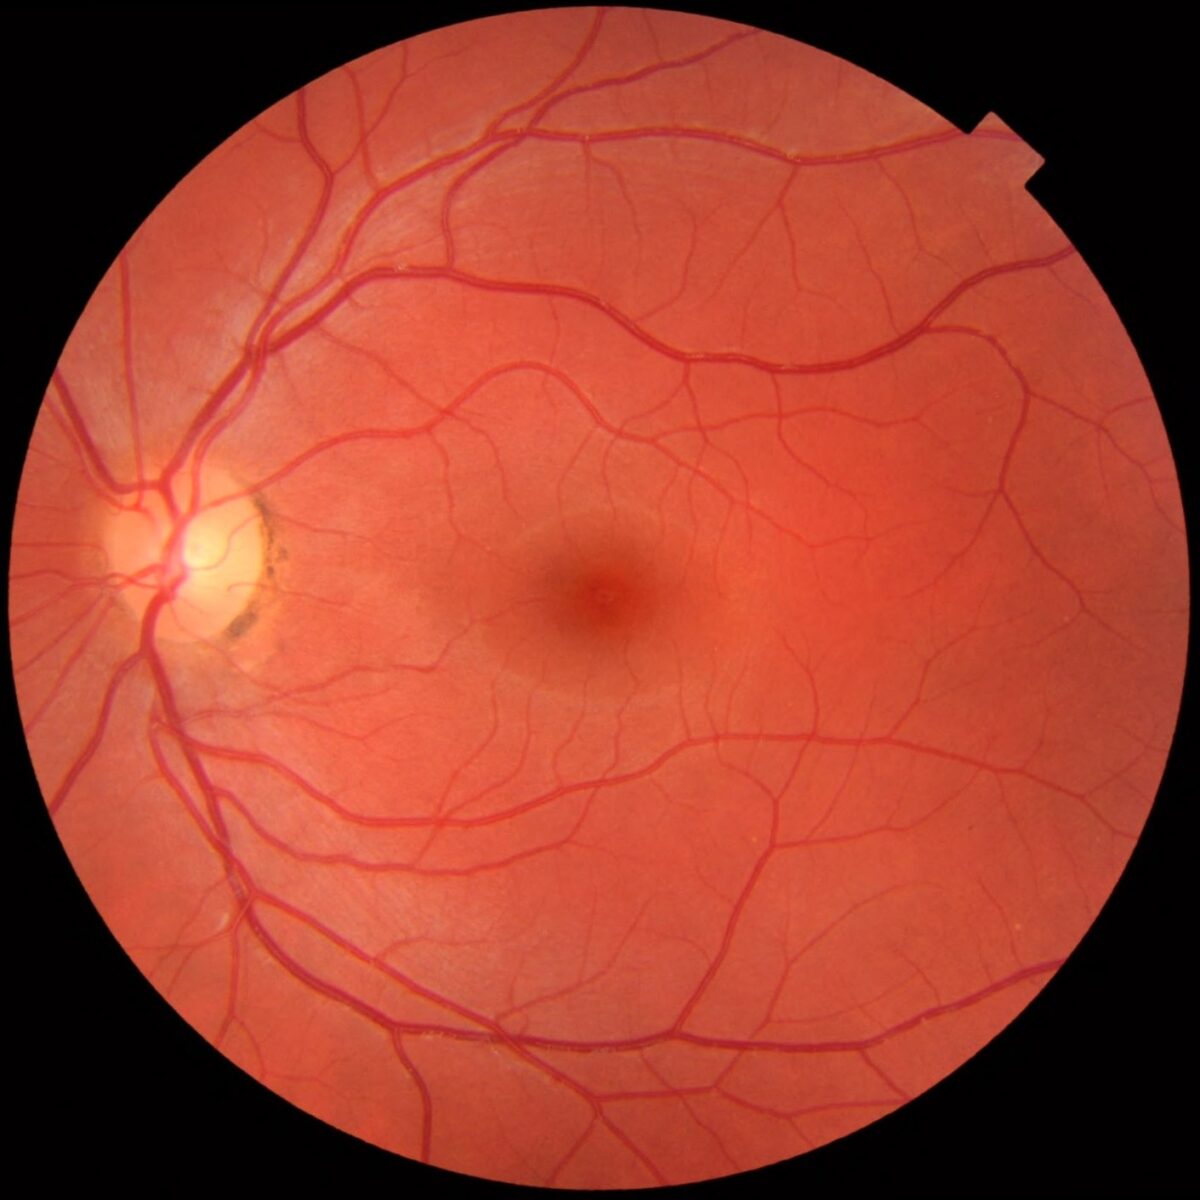 Fundus of the eye as seen through an ophthalmoscope